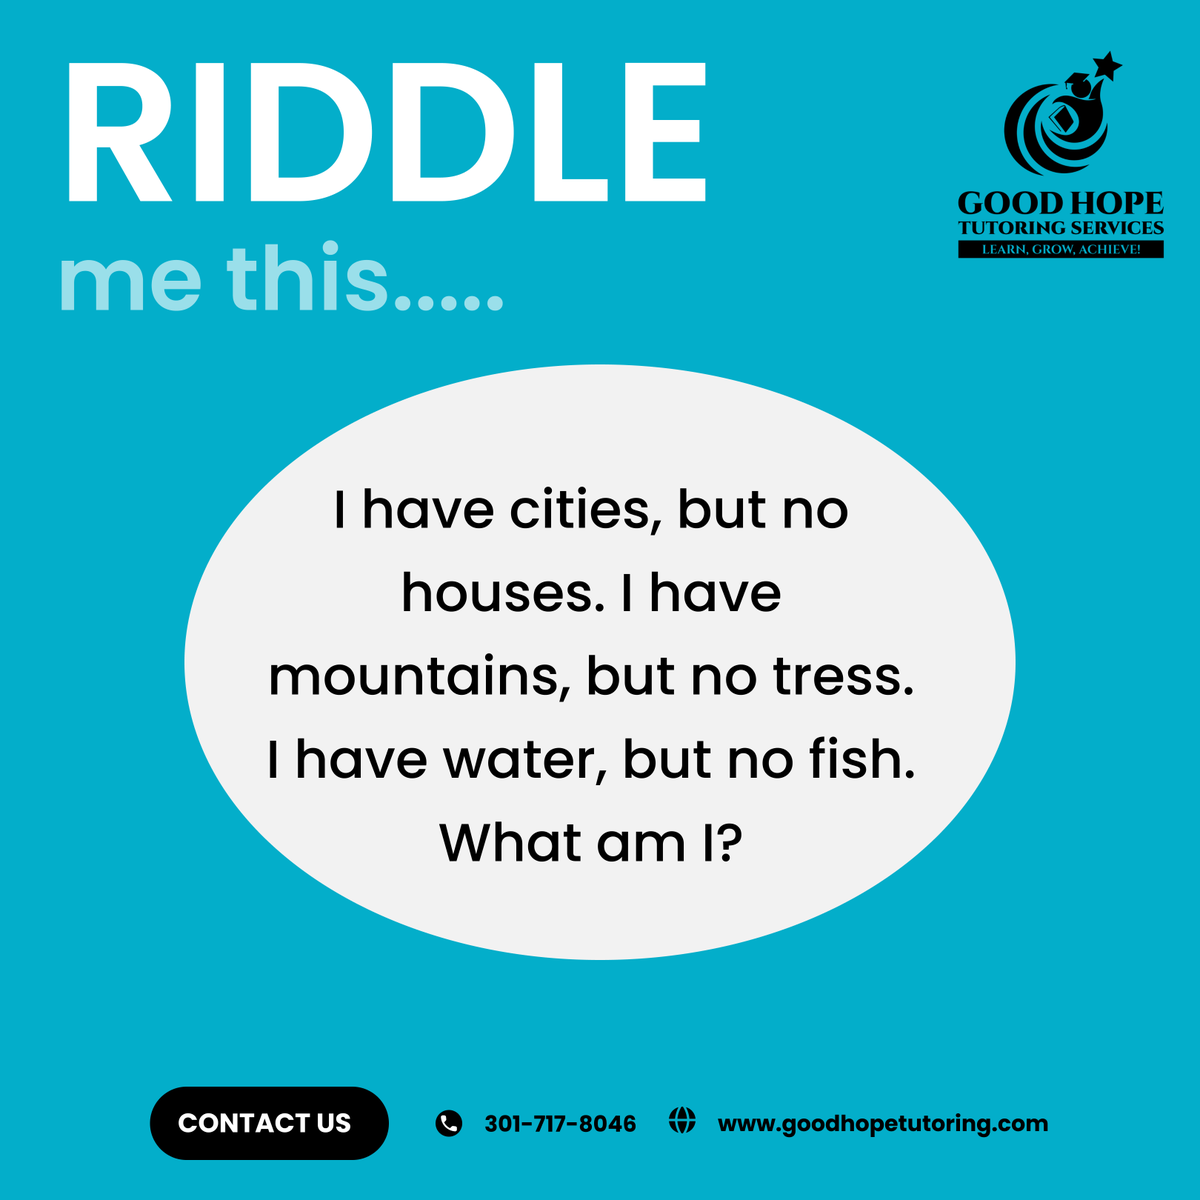 🤔🌆 Can you solve this riddle? 🏞️ Comment below with your answer! 

#RiddleMeThis #BrainTeaser #ThinkOutsideTheBox #EarlyTutoring #SuccessMindset #StressFreeStudying  #PositiveParenting #MindfulKids #GrowTogether #MentalHealthMatters #AcademicSuccess #WellnessWednesday 🧩